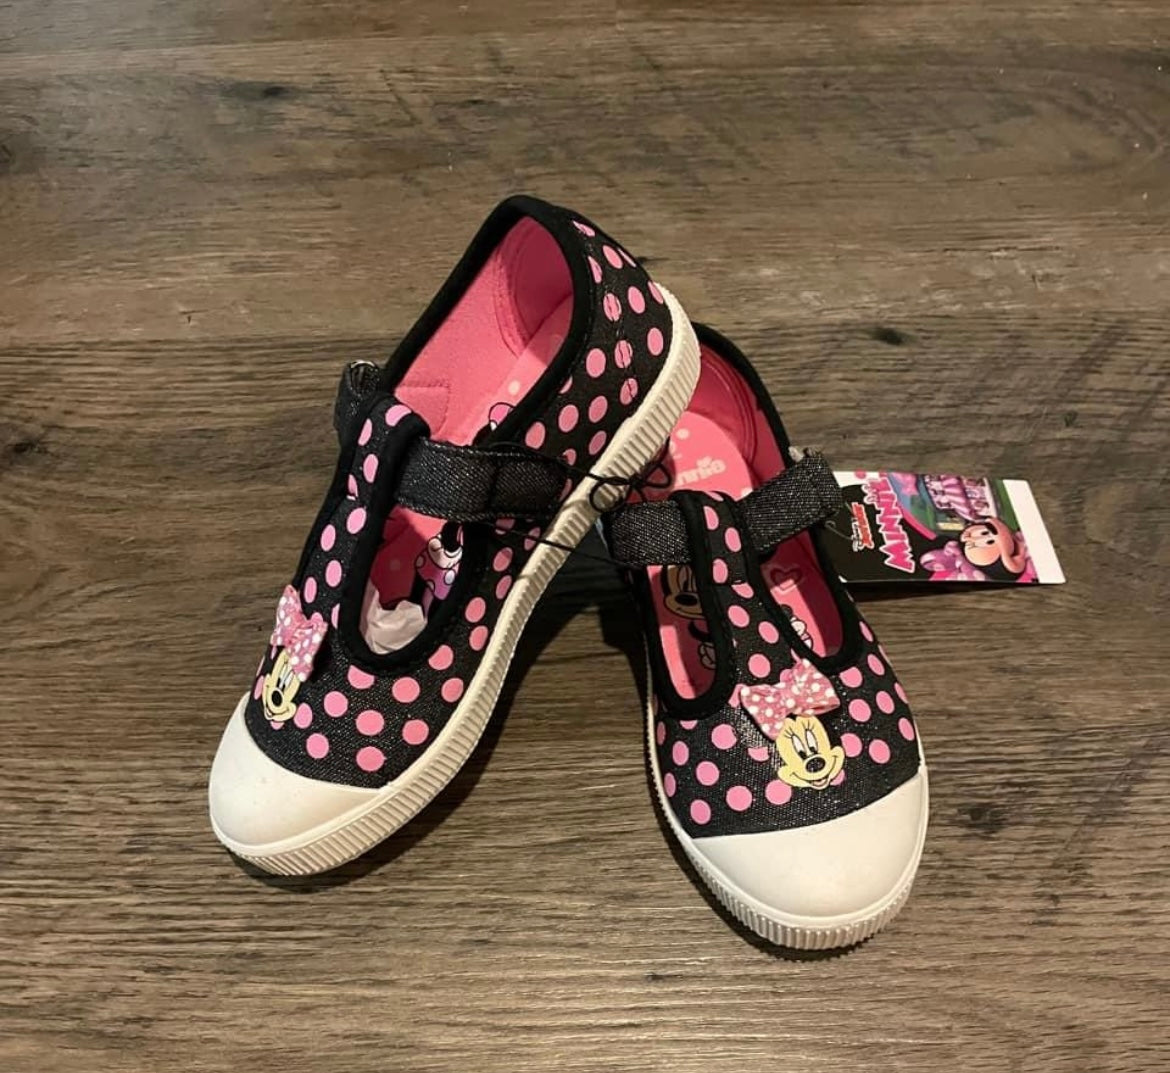 New toddler size 10 Disney minnie mouse shoes